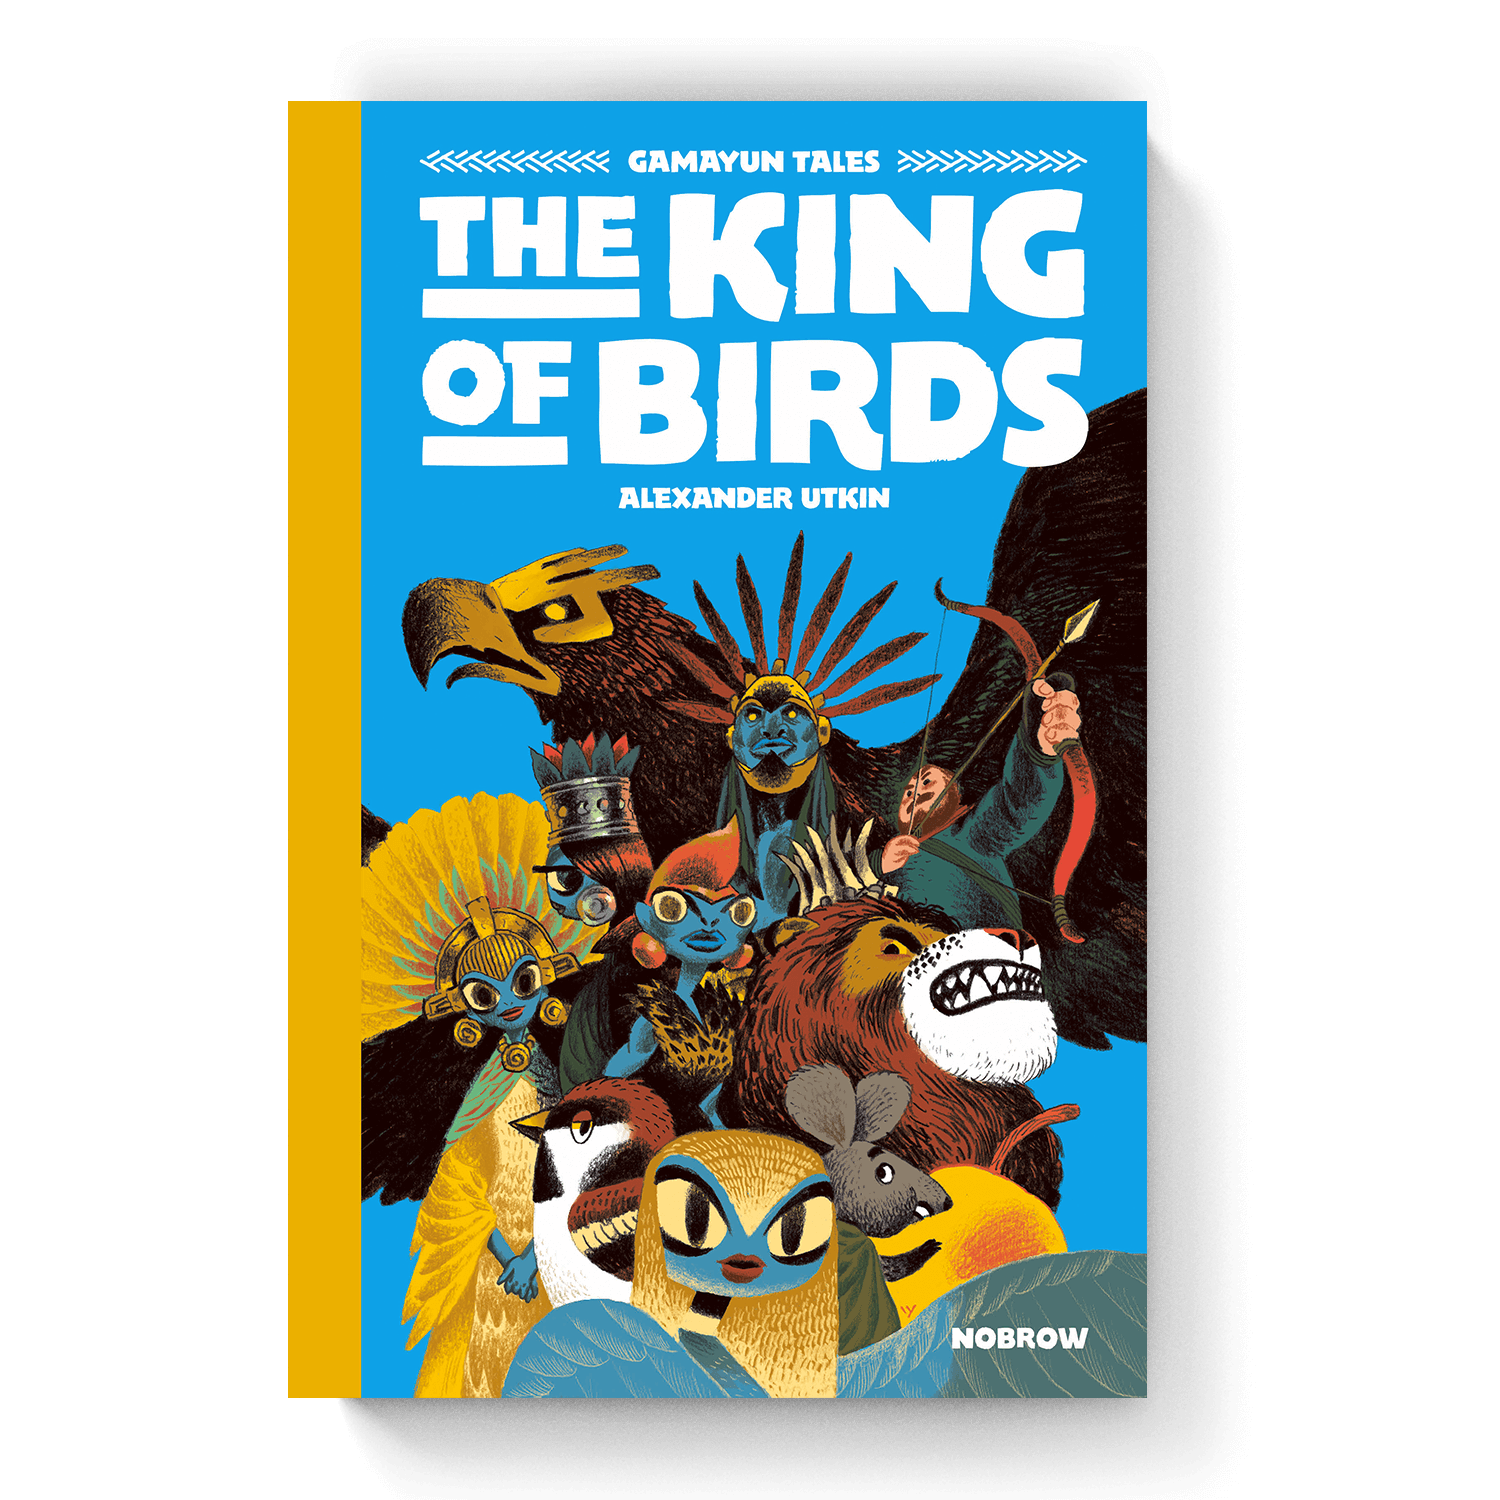 The King of Birds (Gamayun Tales Book 1)